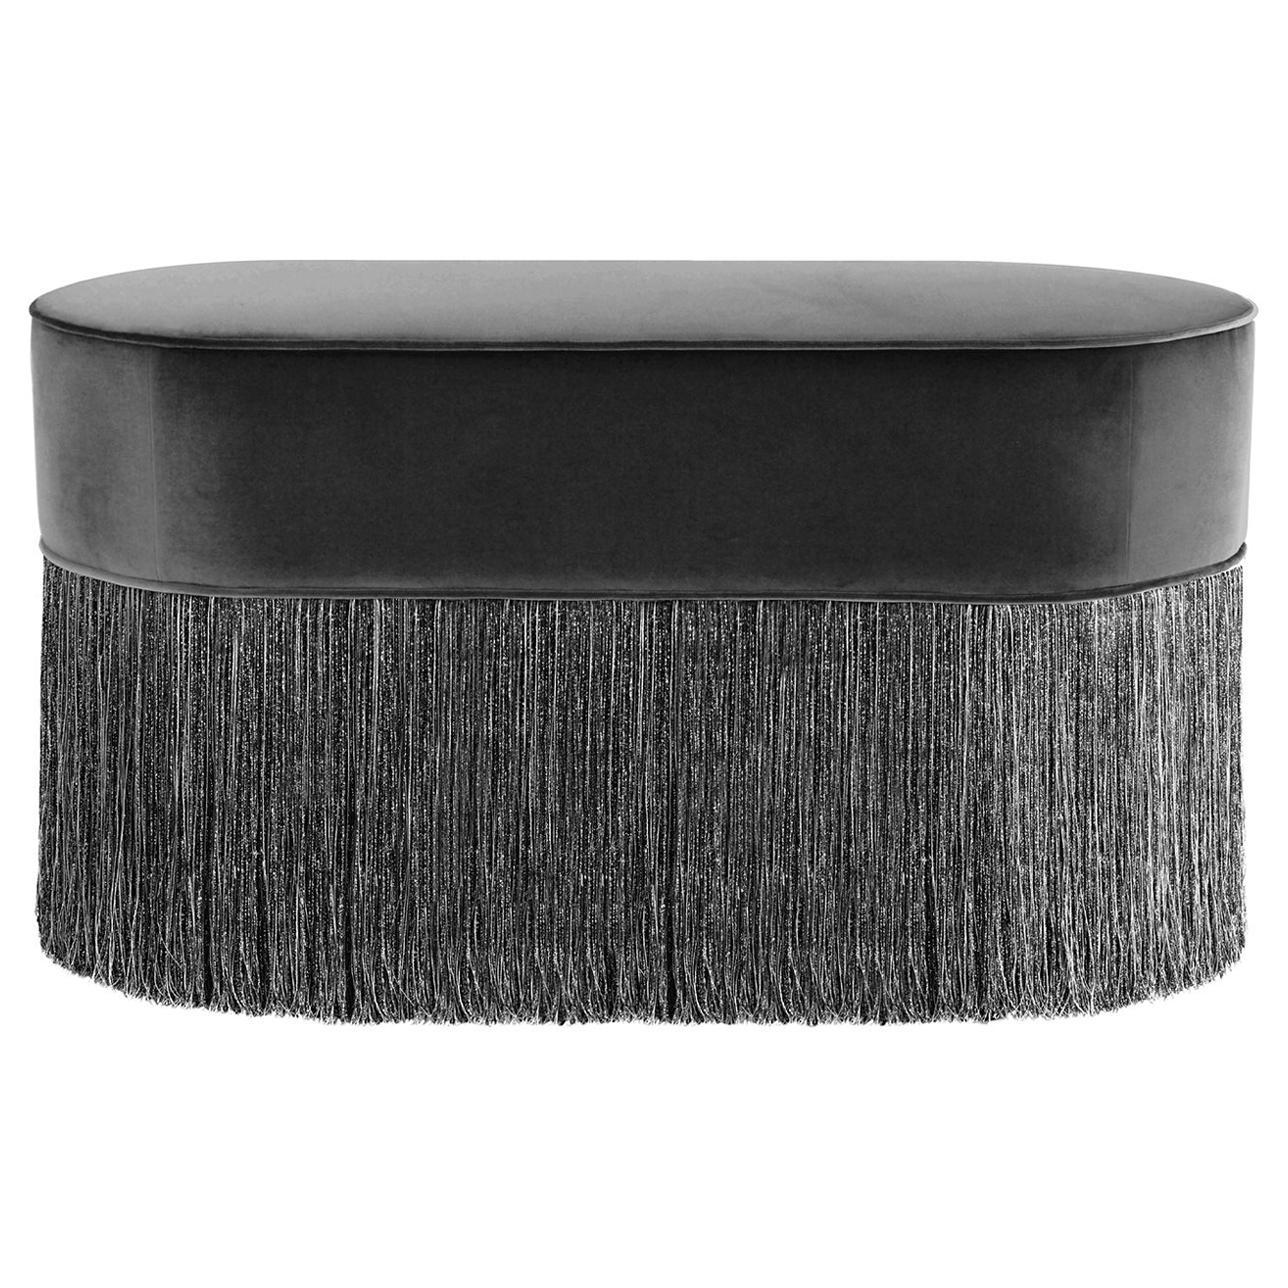 Sparkle Black Oval Ottoman with Black and Silver Fringe For Sale